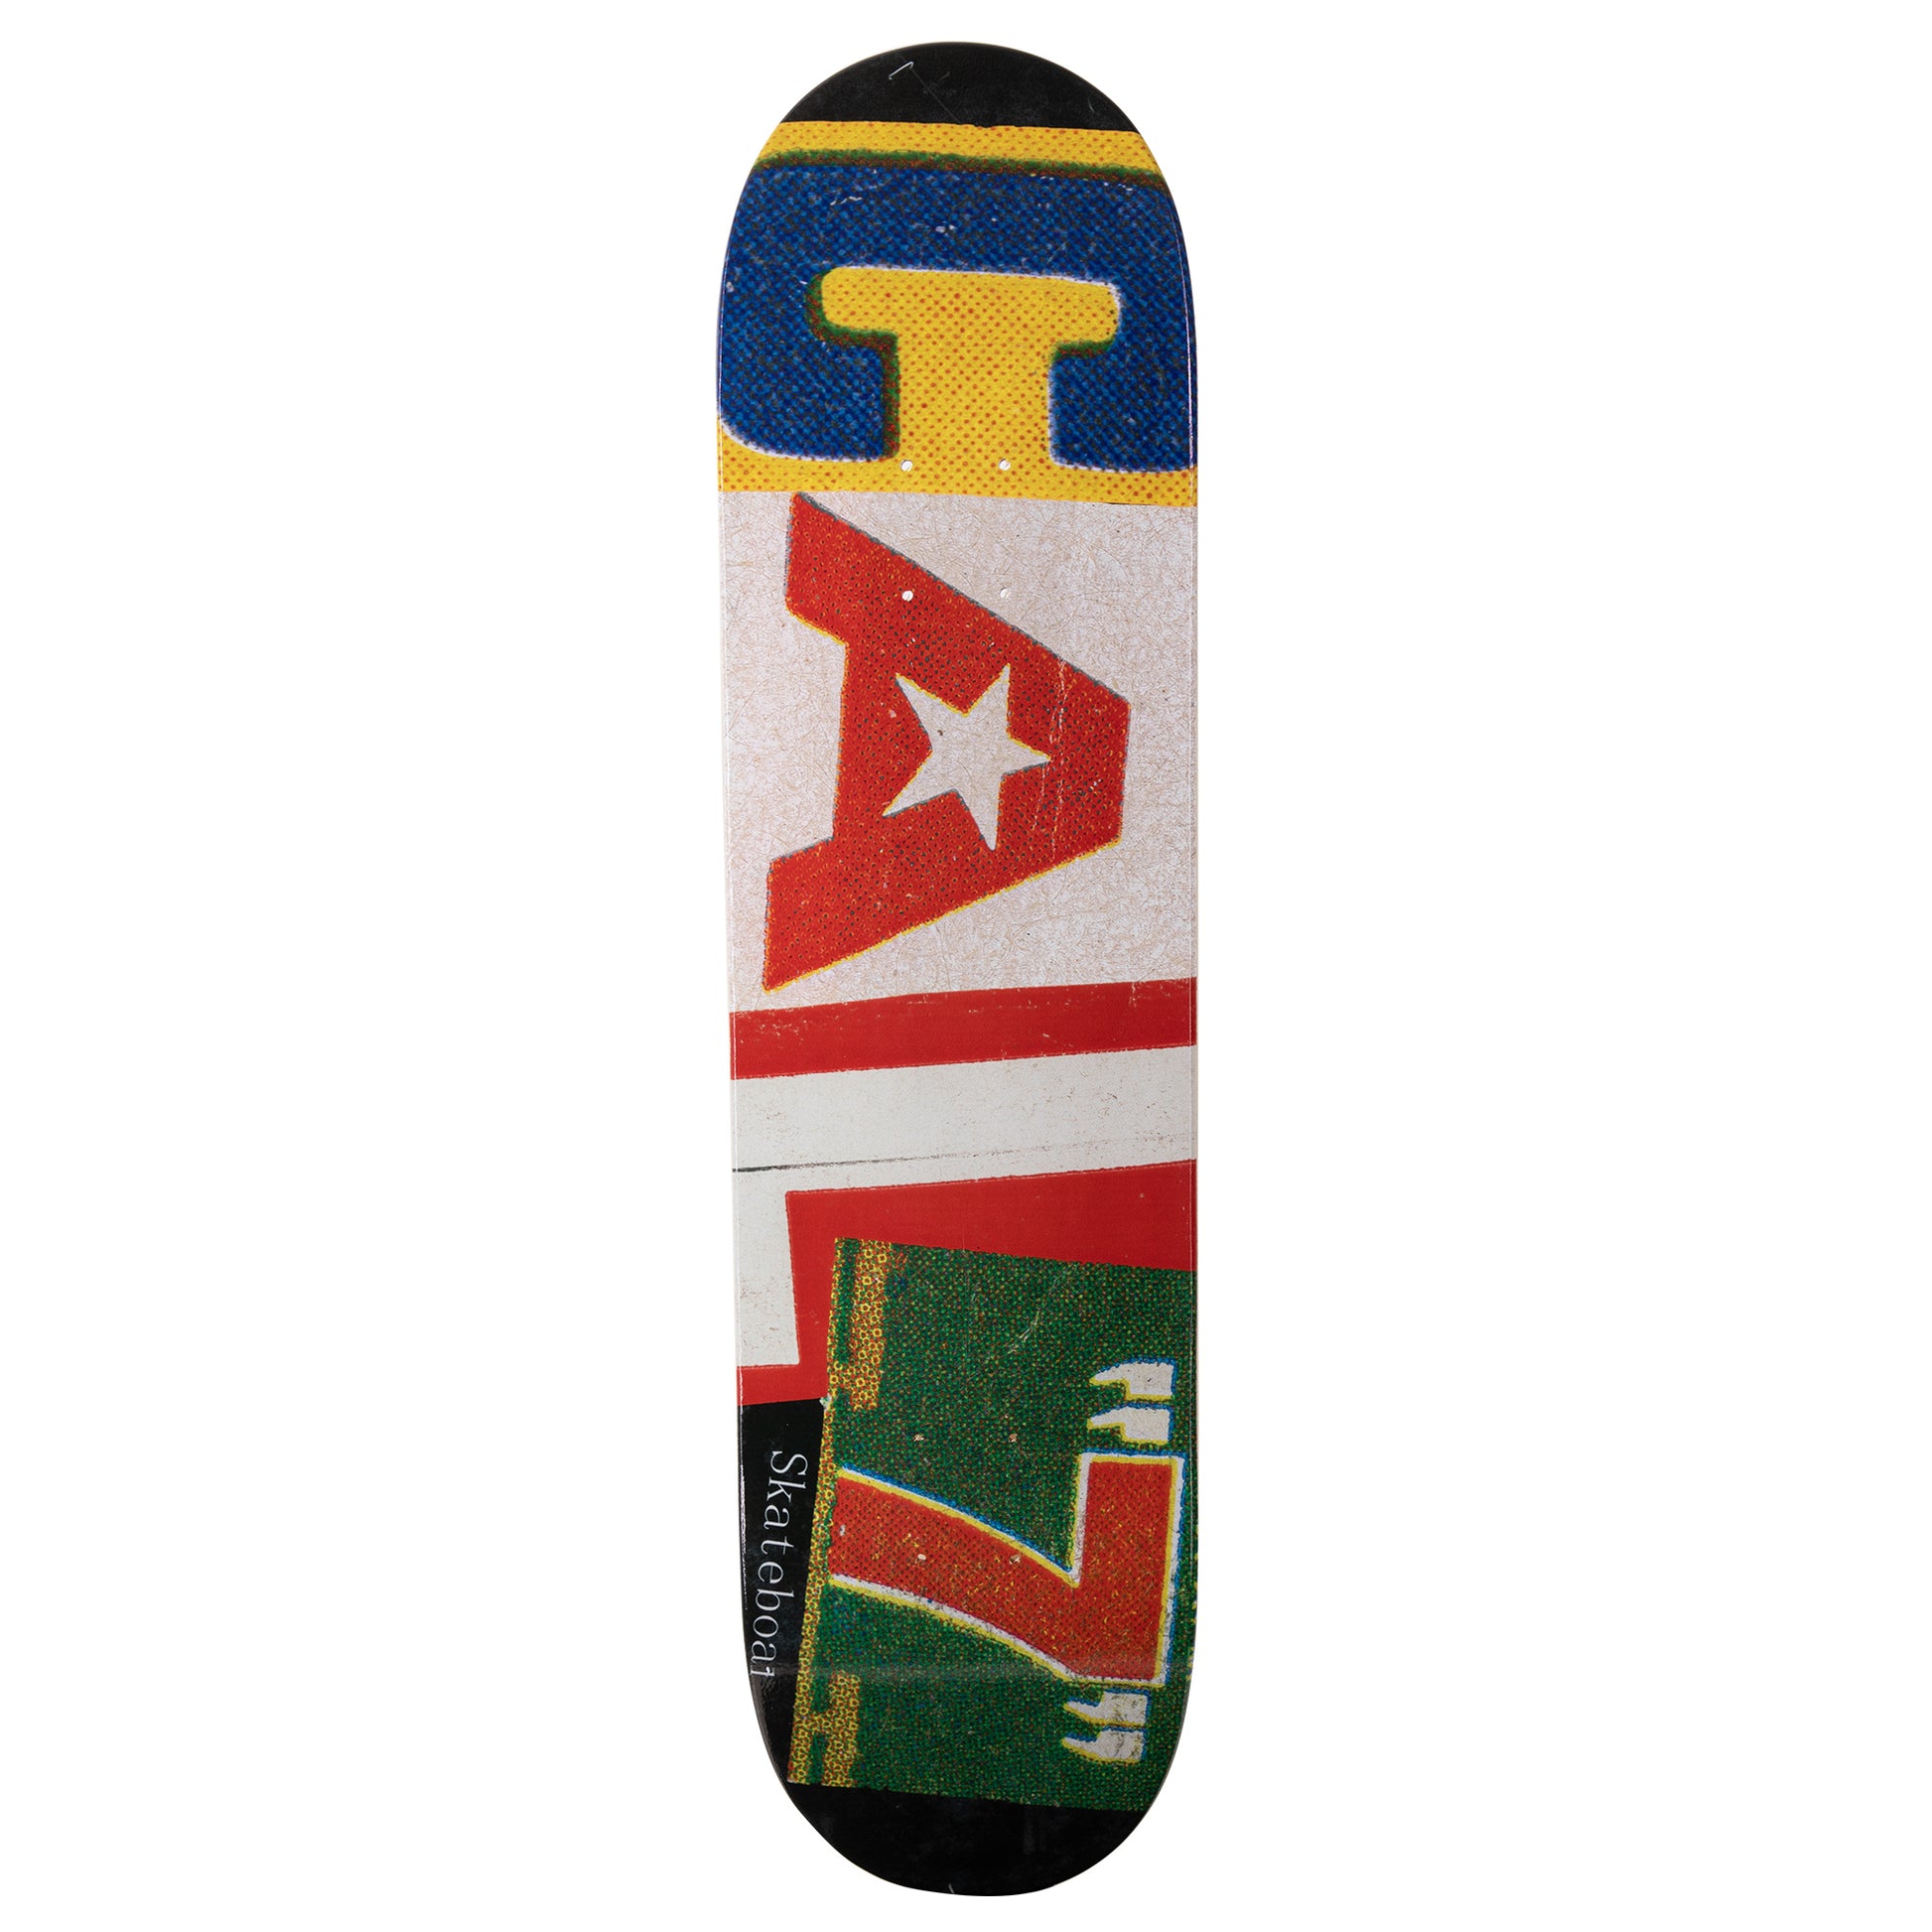 Cal 7 Ransom 7.75”/8”/ 8.25”/8.5”-Inch Skateboard Deck with Collage Text Logo and Vintage Finish